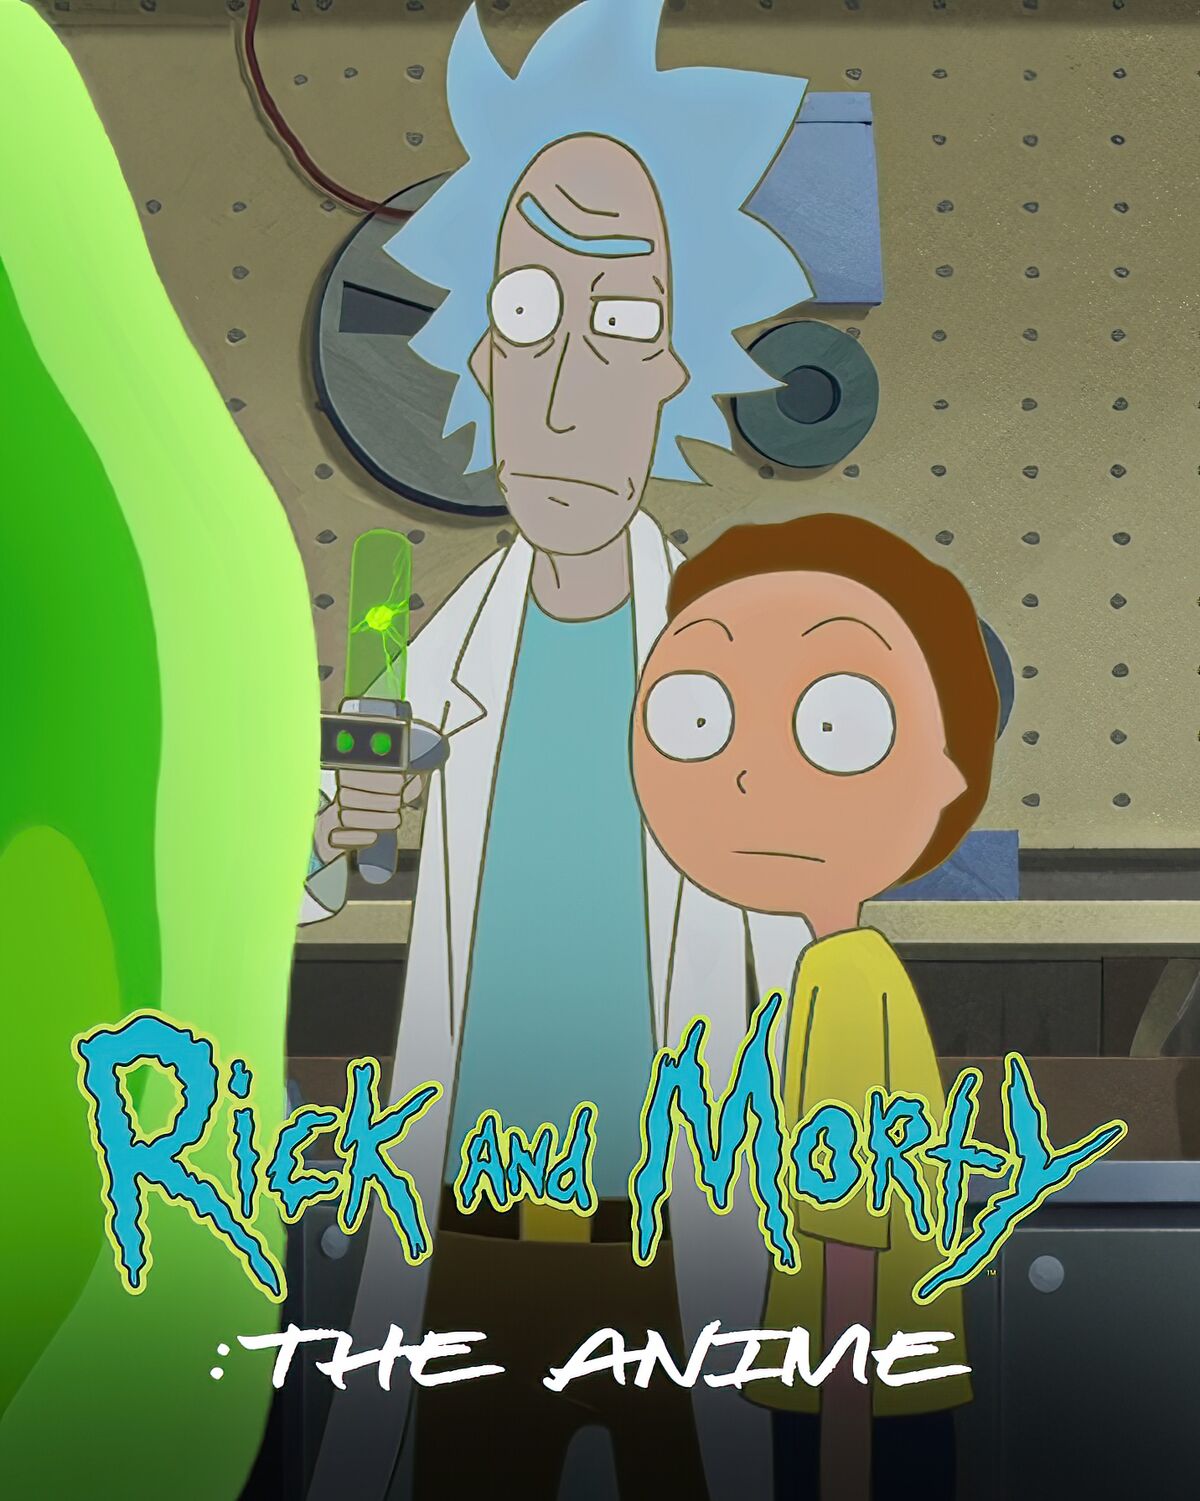 Will Rick and Morty Anime retain its qualities from the Main Series